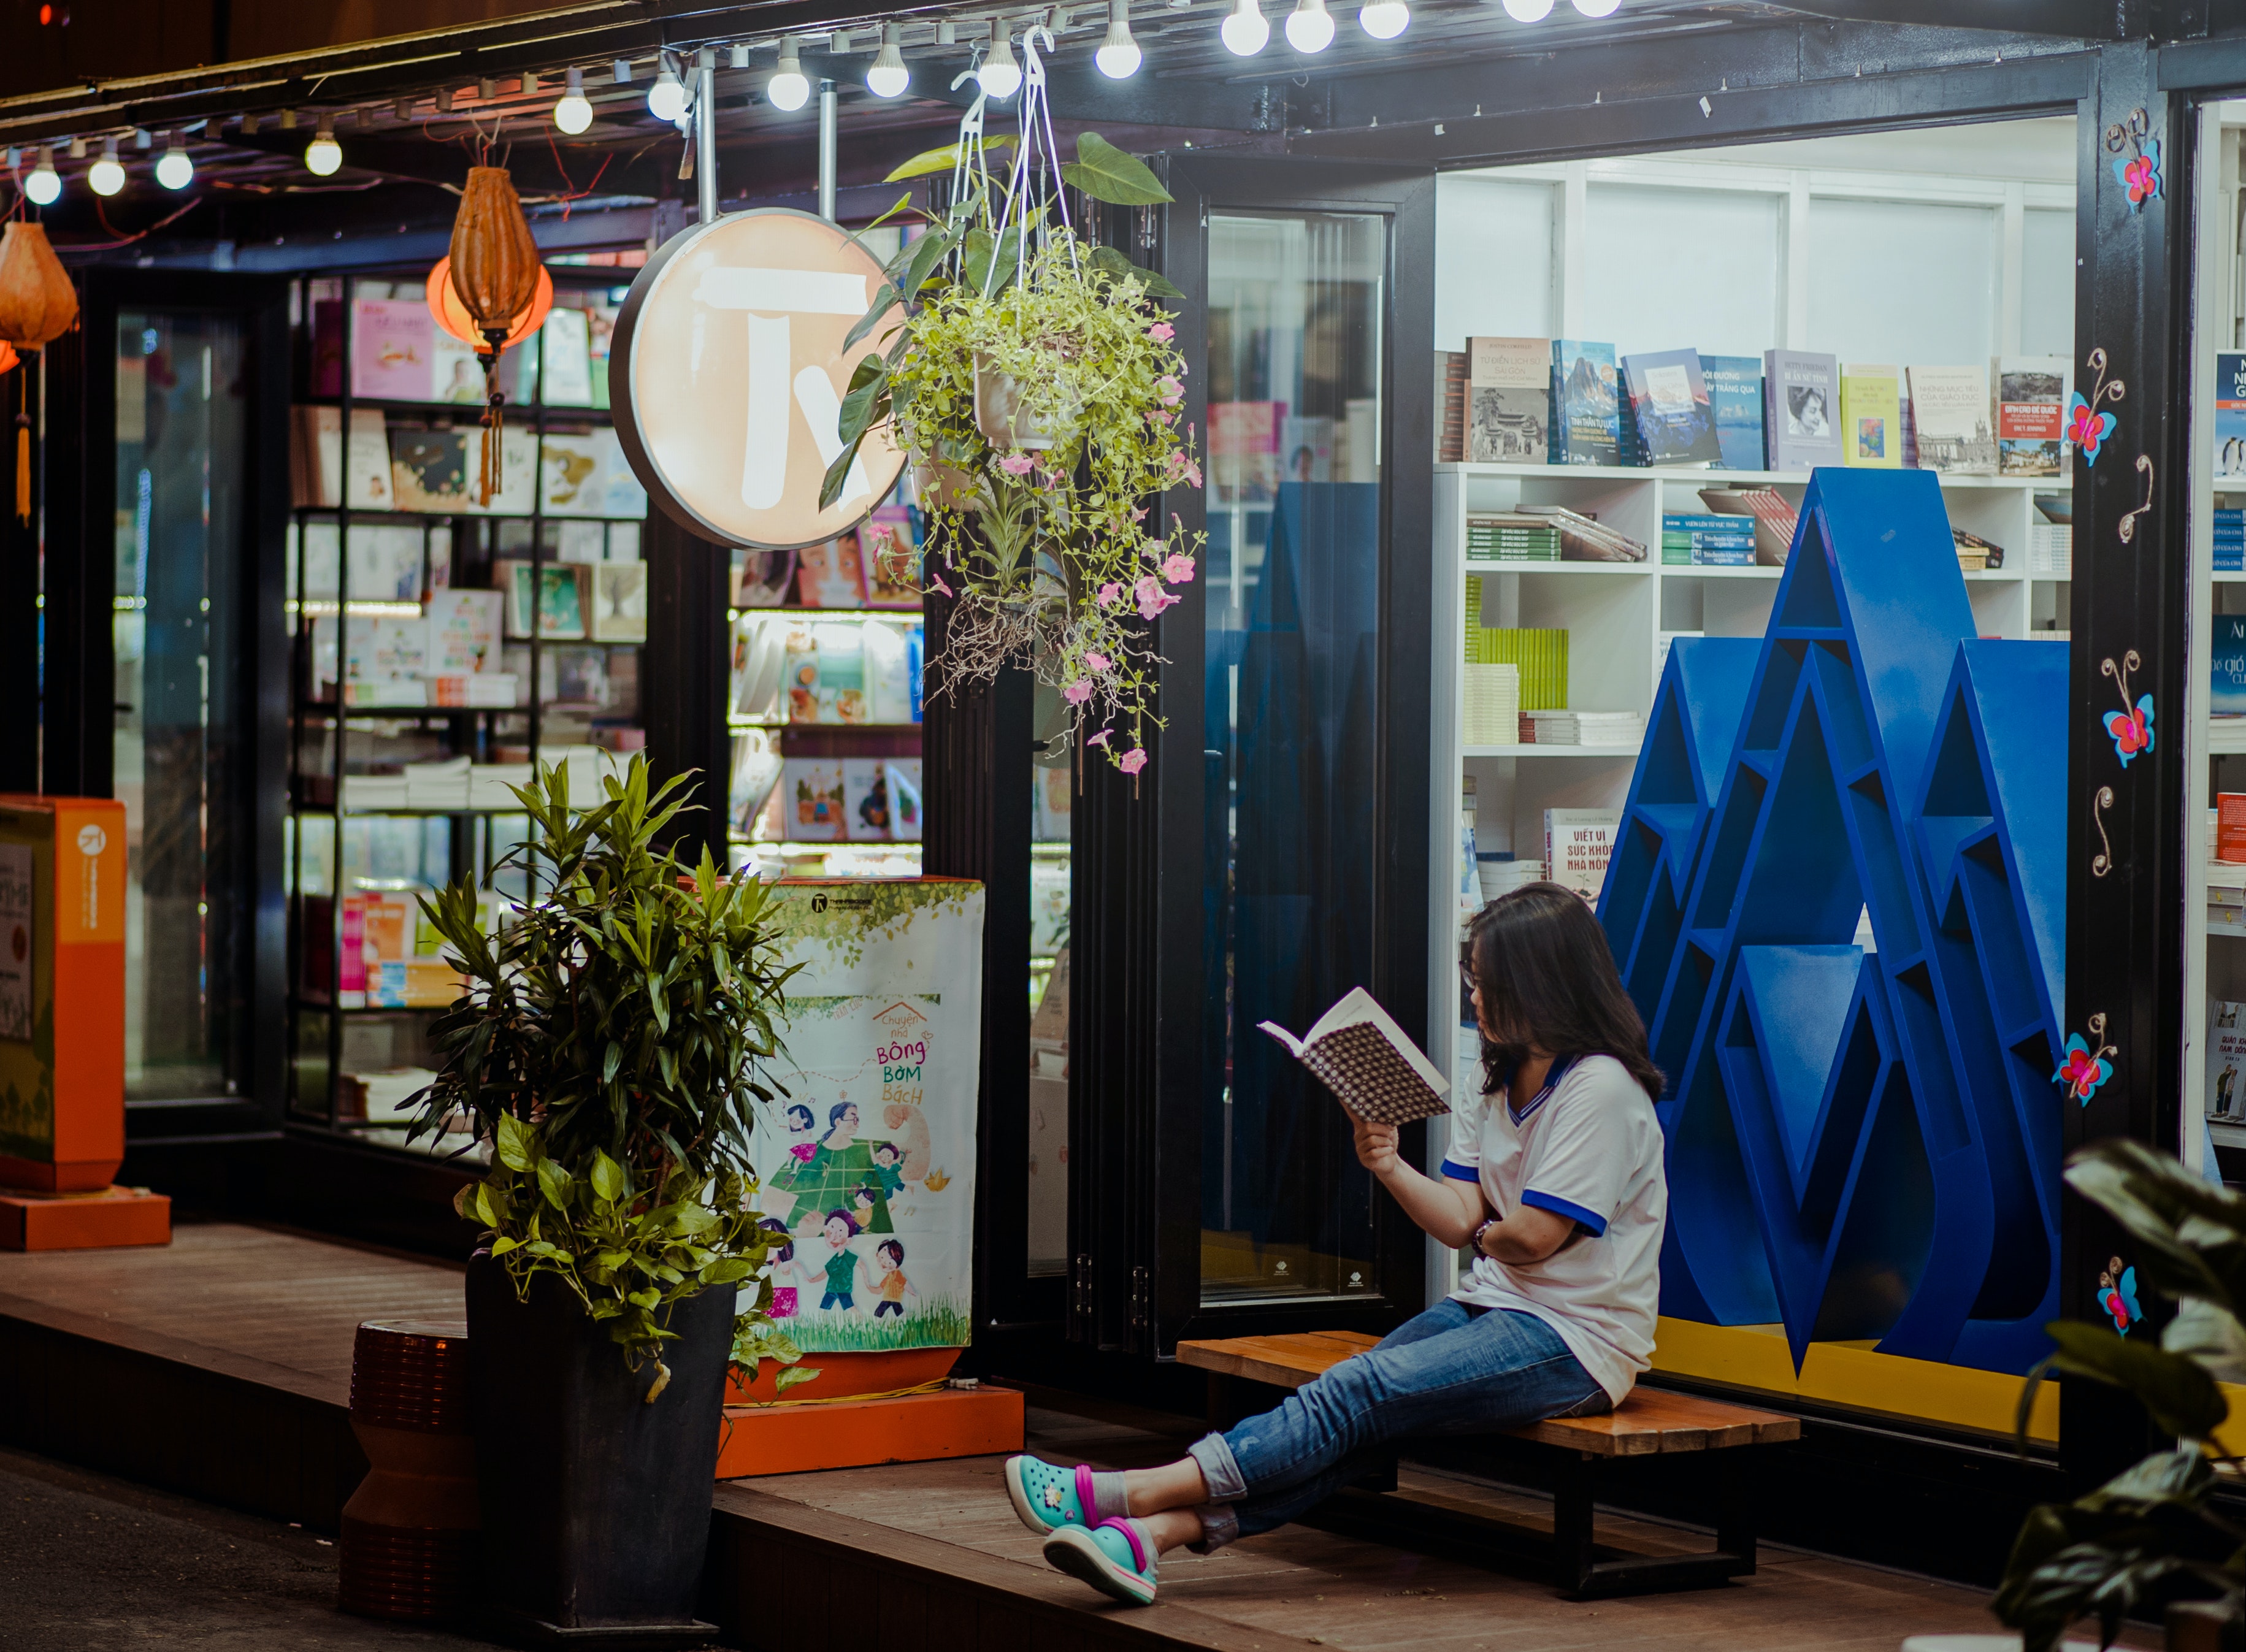 Find Great Reads at These Bookstores Around Cambridge